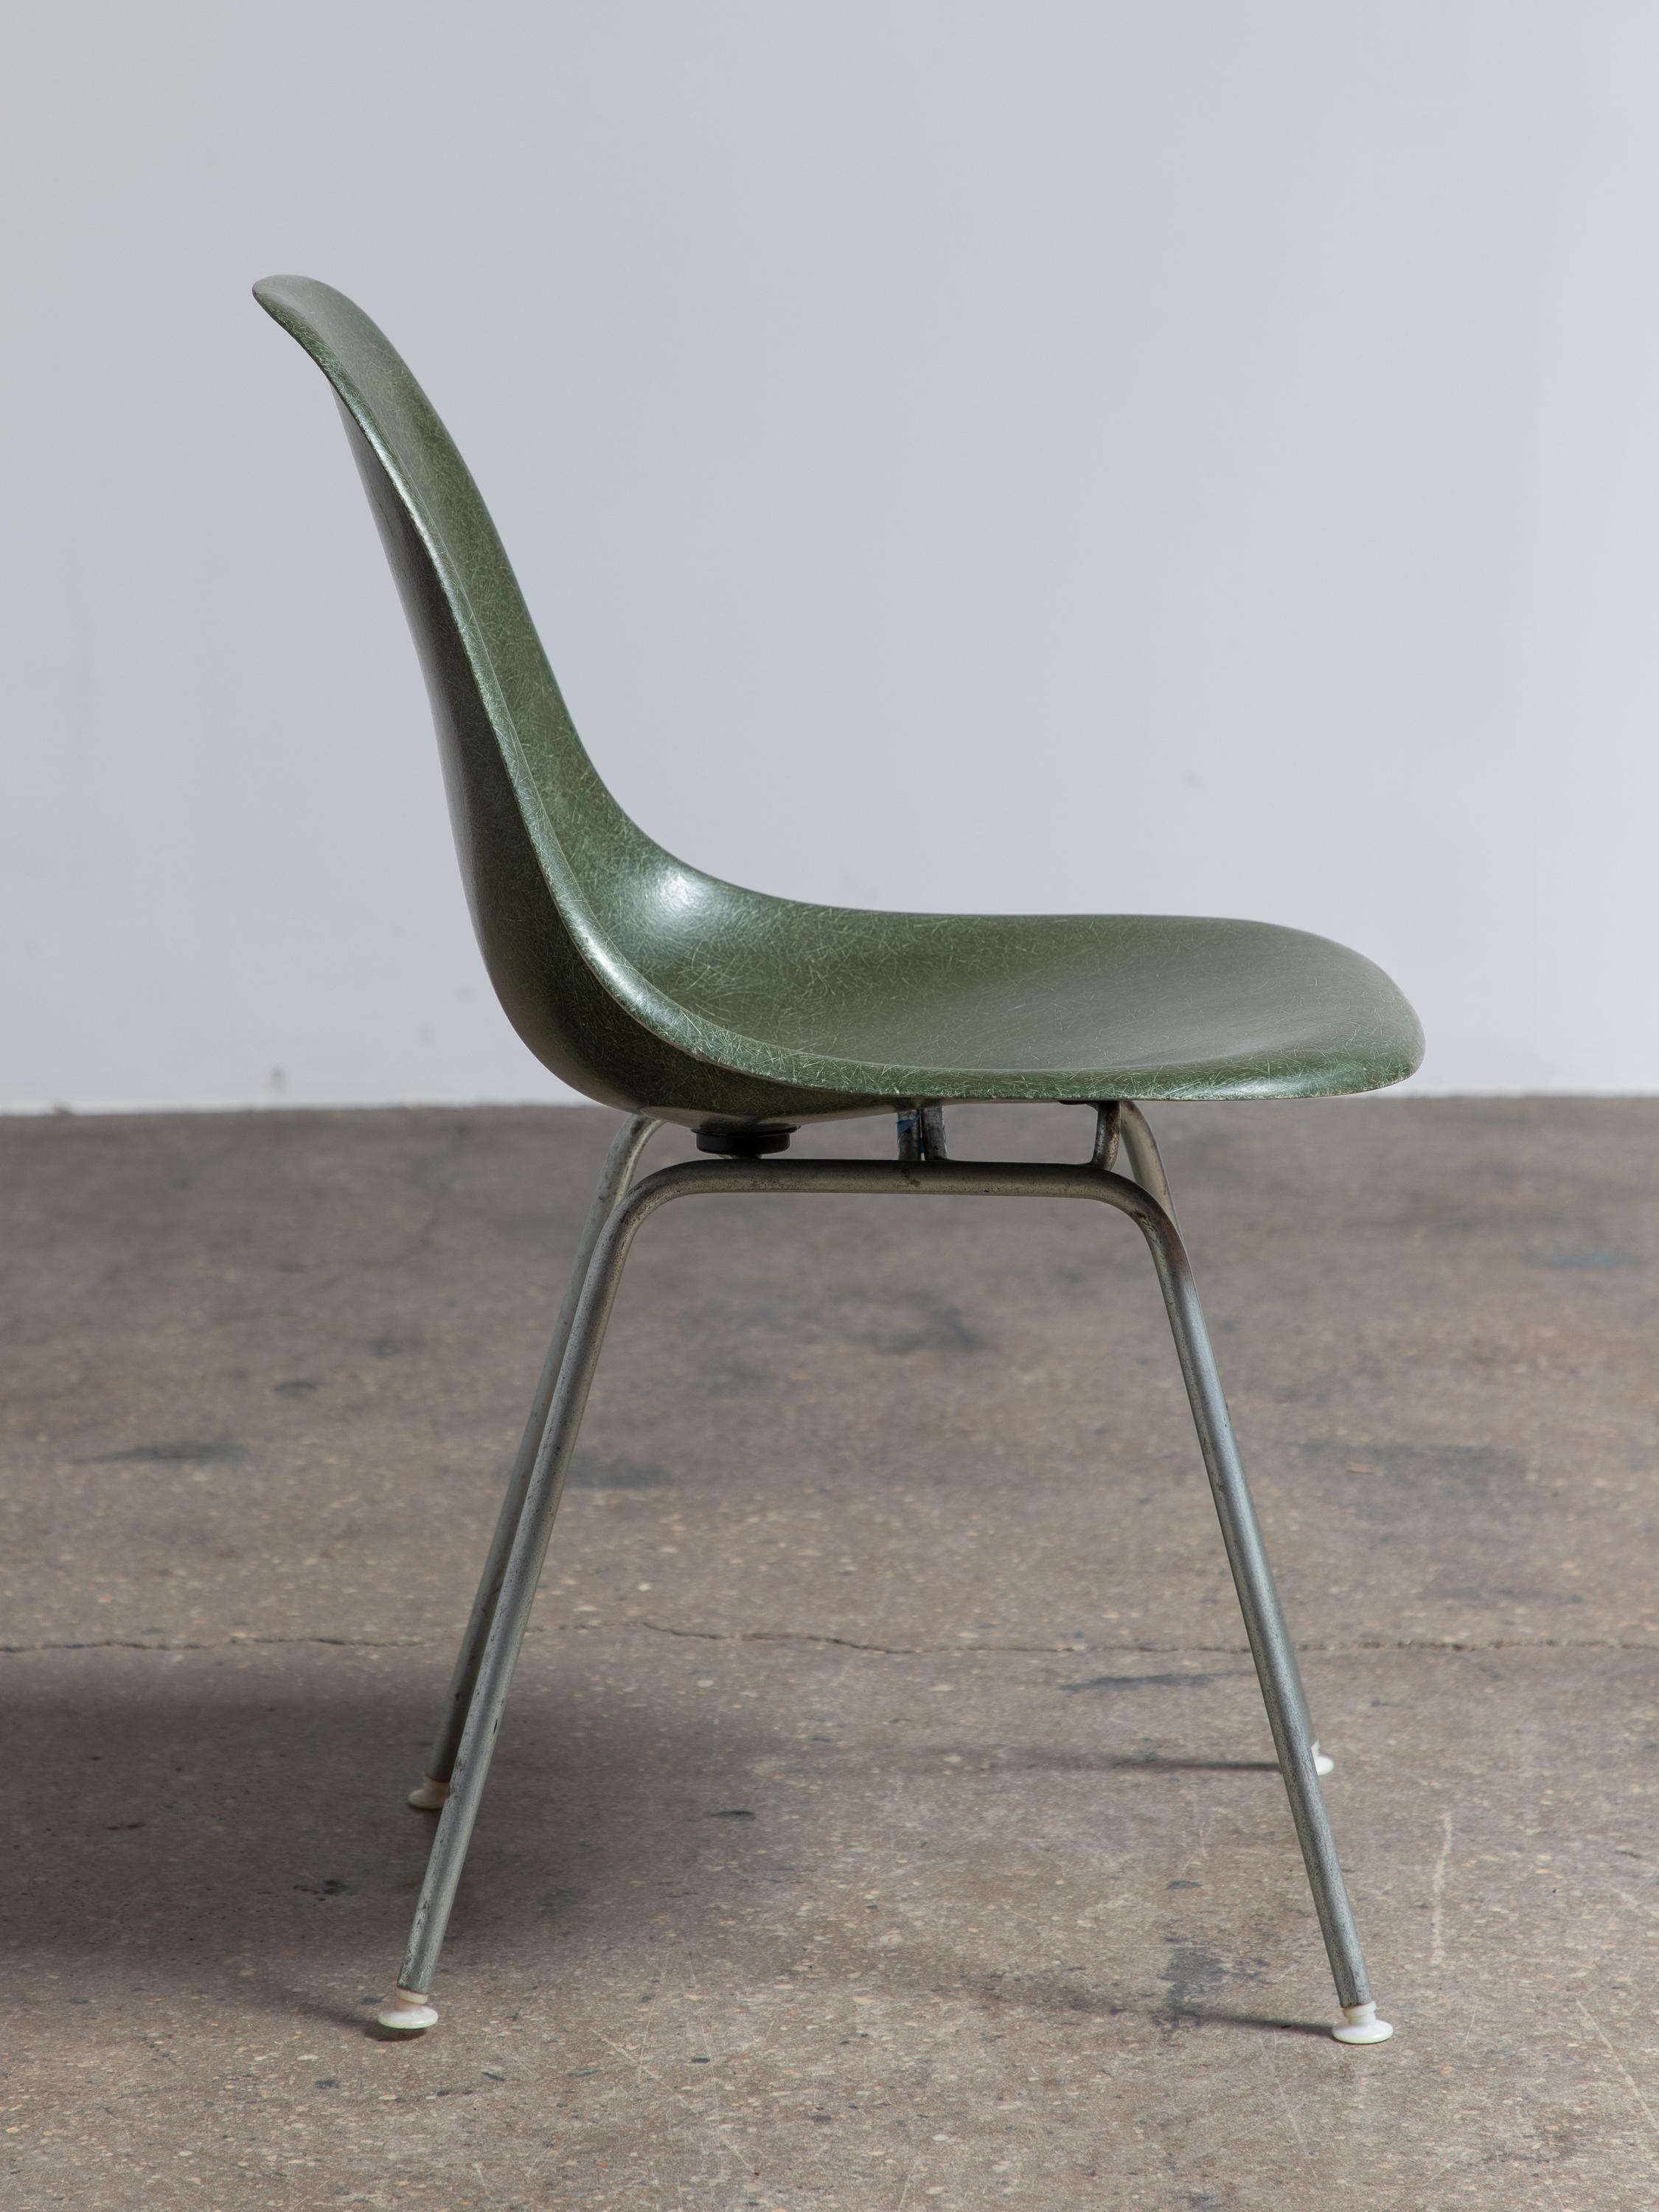 American Olive Green Eames for Herman Miller Vintage 1960s Fiberglass Shell Chairs For Sale